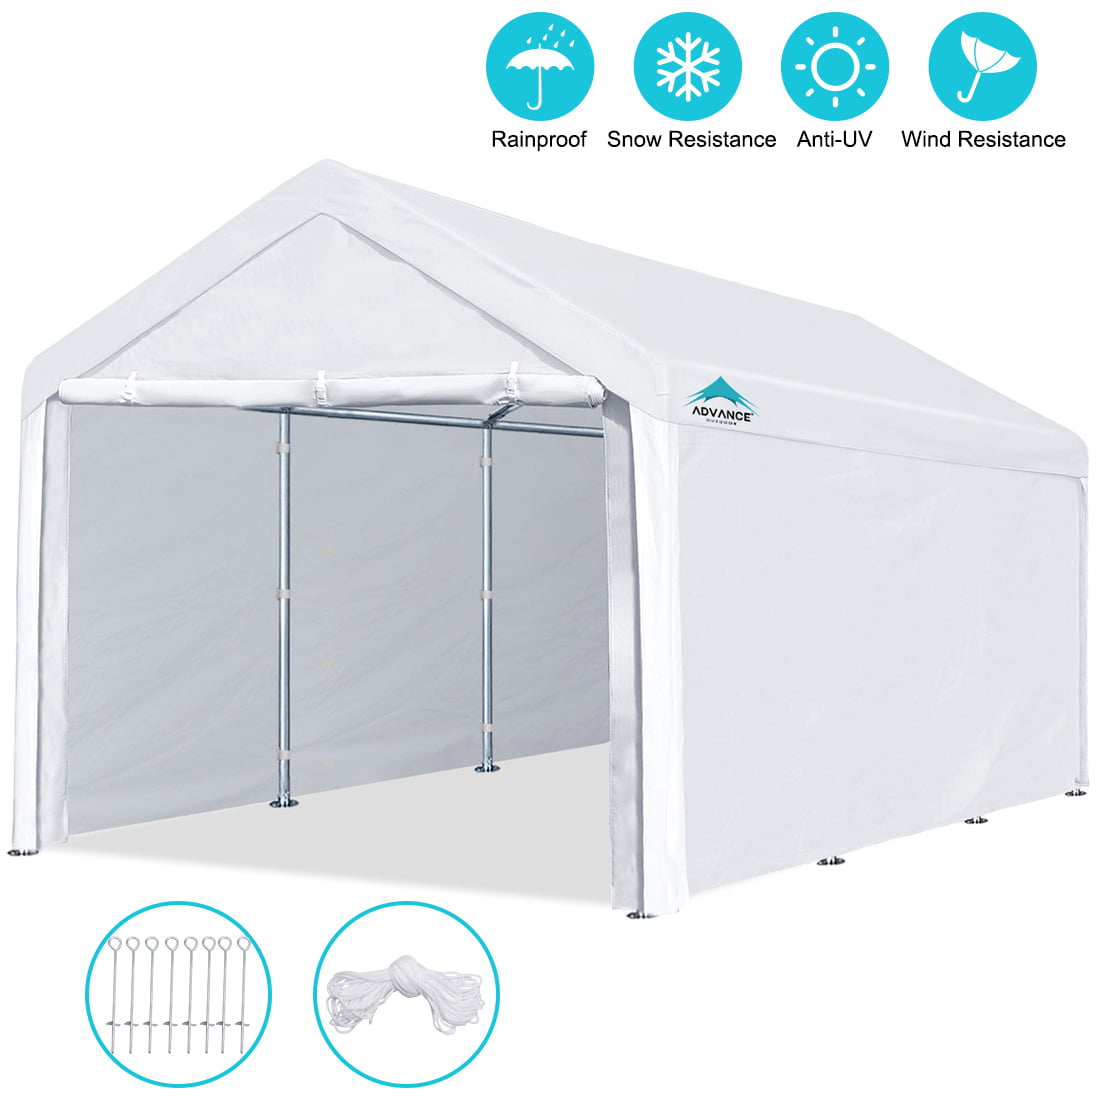 White Deari 10 x 15 Feet Heavy Duty Carport Doors and 8 Steel Legs Outdoor Portable Car Canopy Shelter with Removable Side Panels 